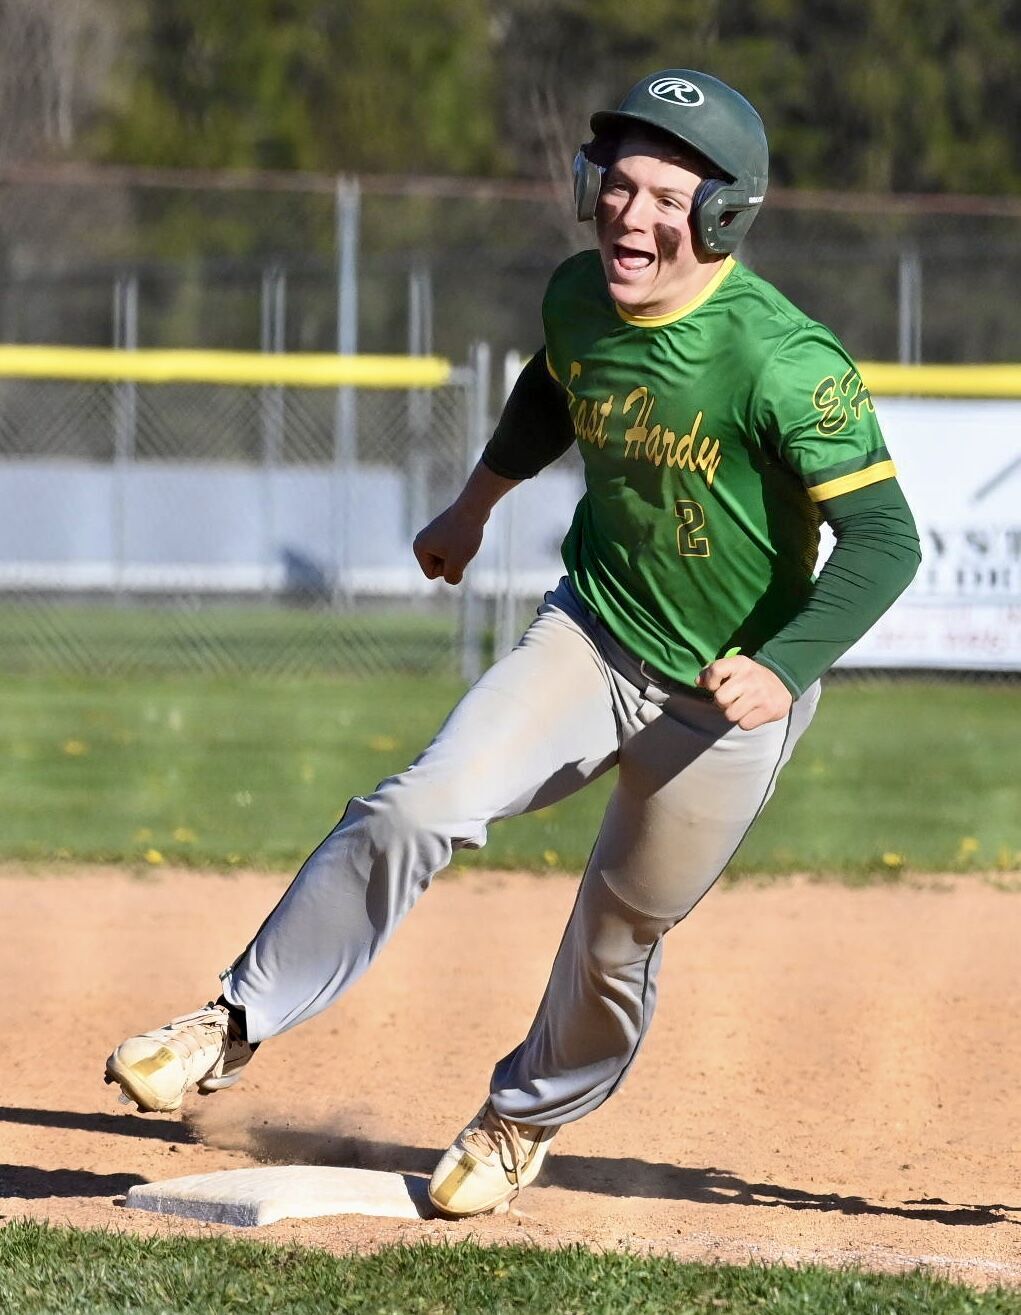 East Hardy hits early and often in 16-3 win over Northern